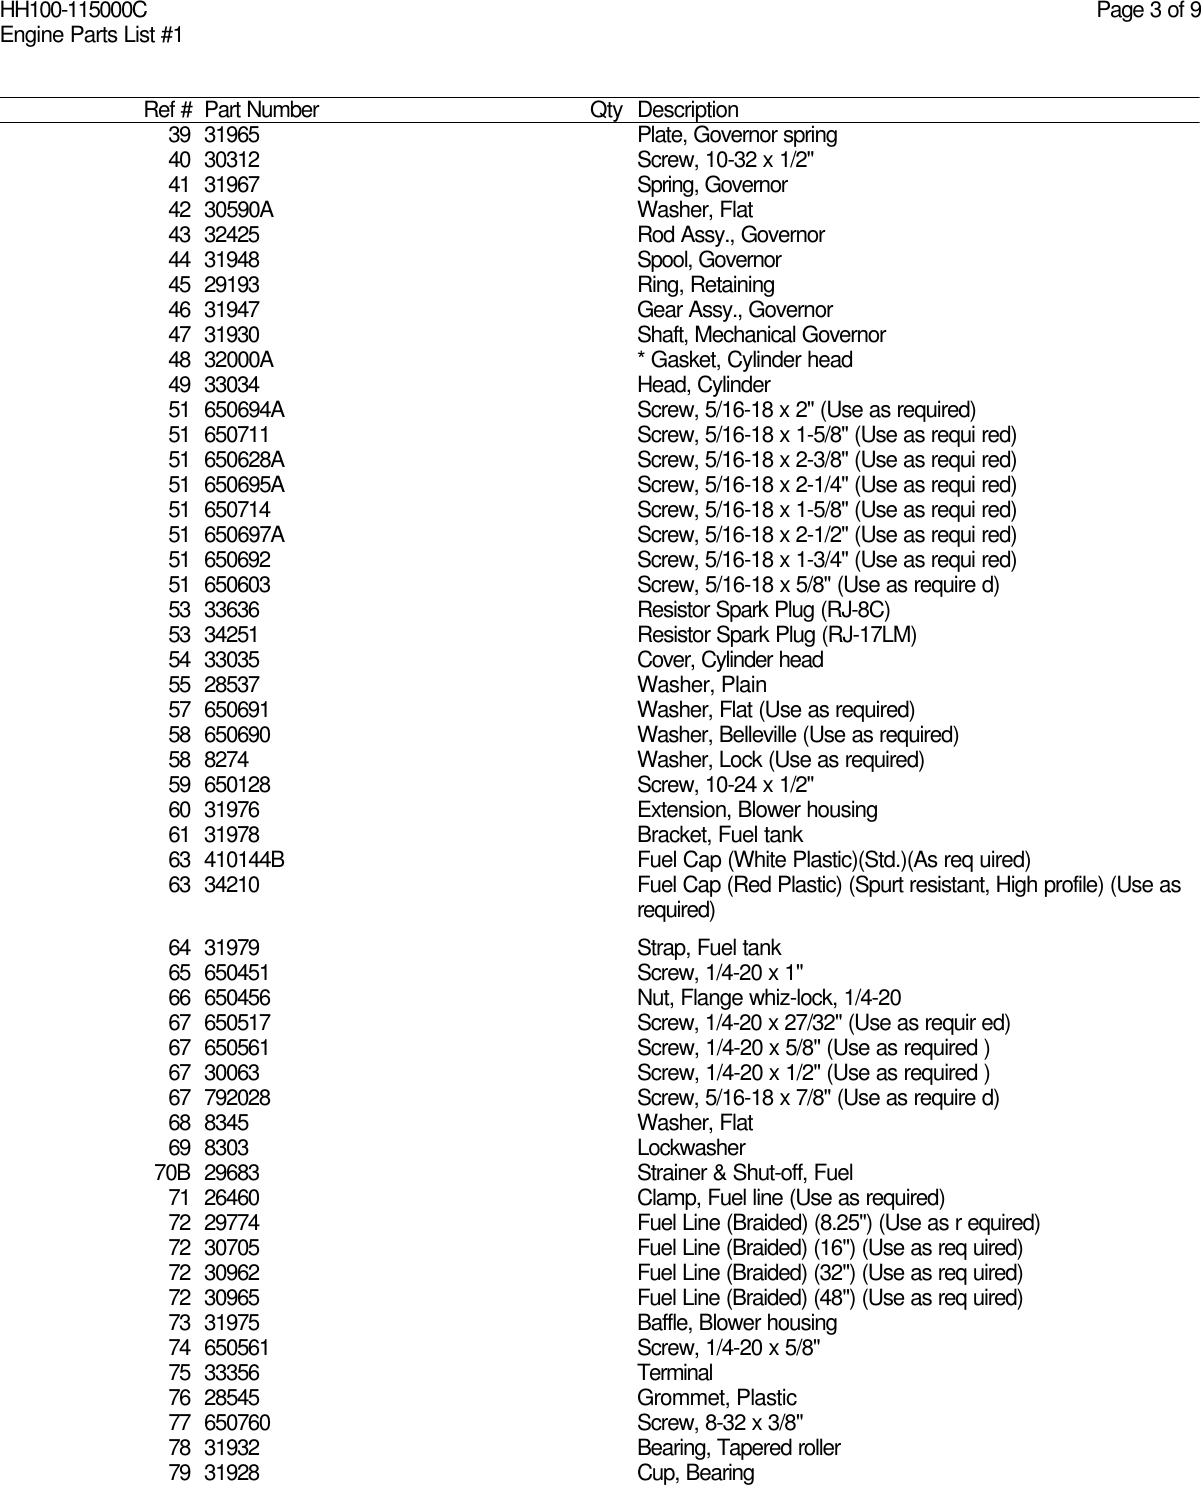 Page 3 of 9 - Diagram And/or PartsList Tecumseh HH100-115000C Parts List